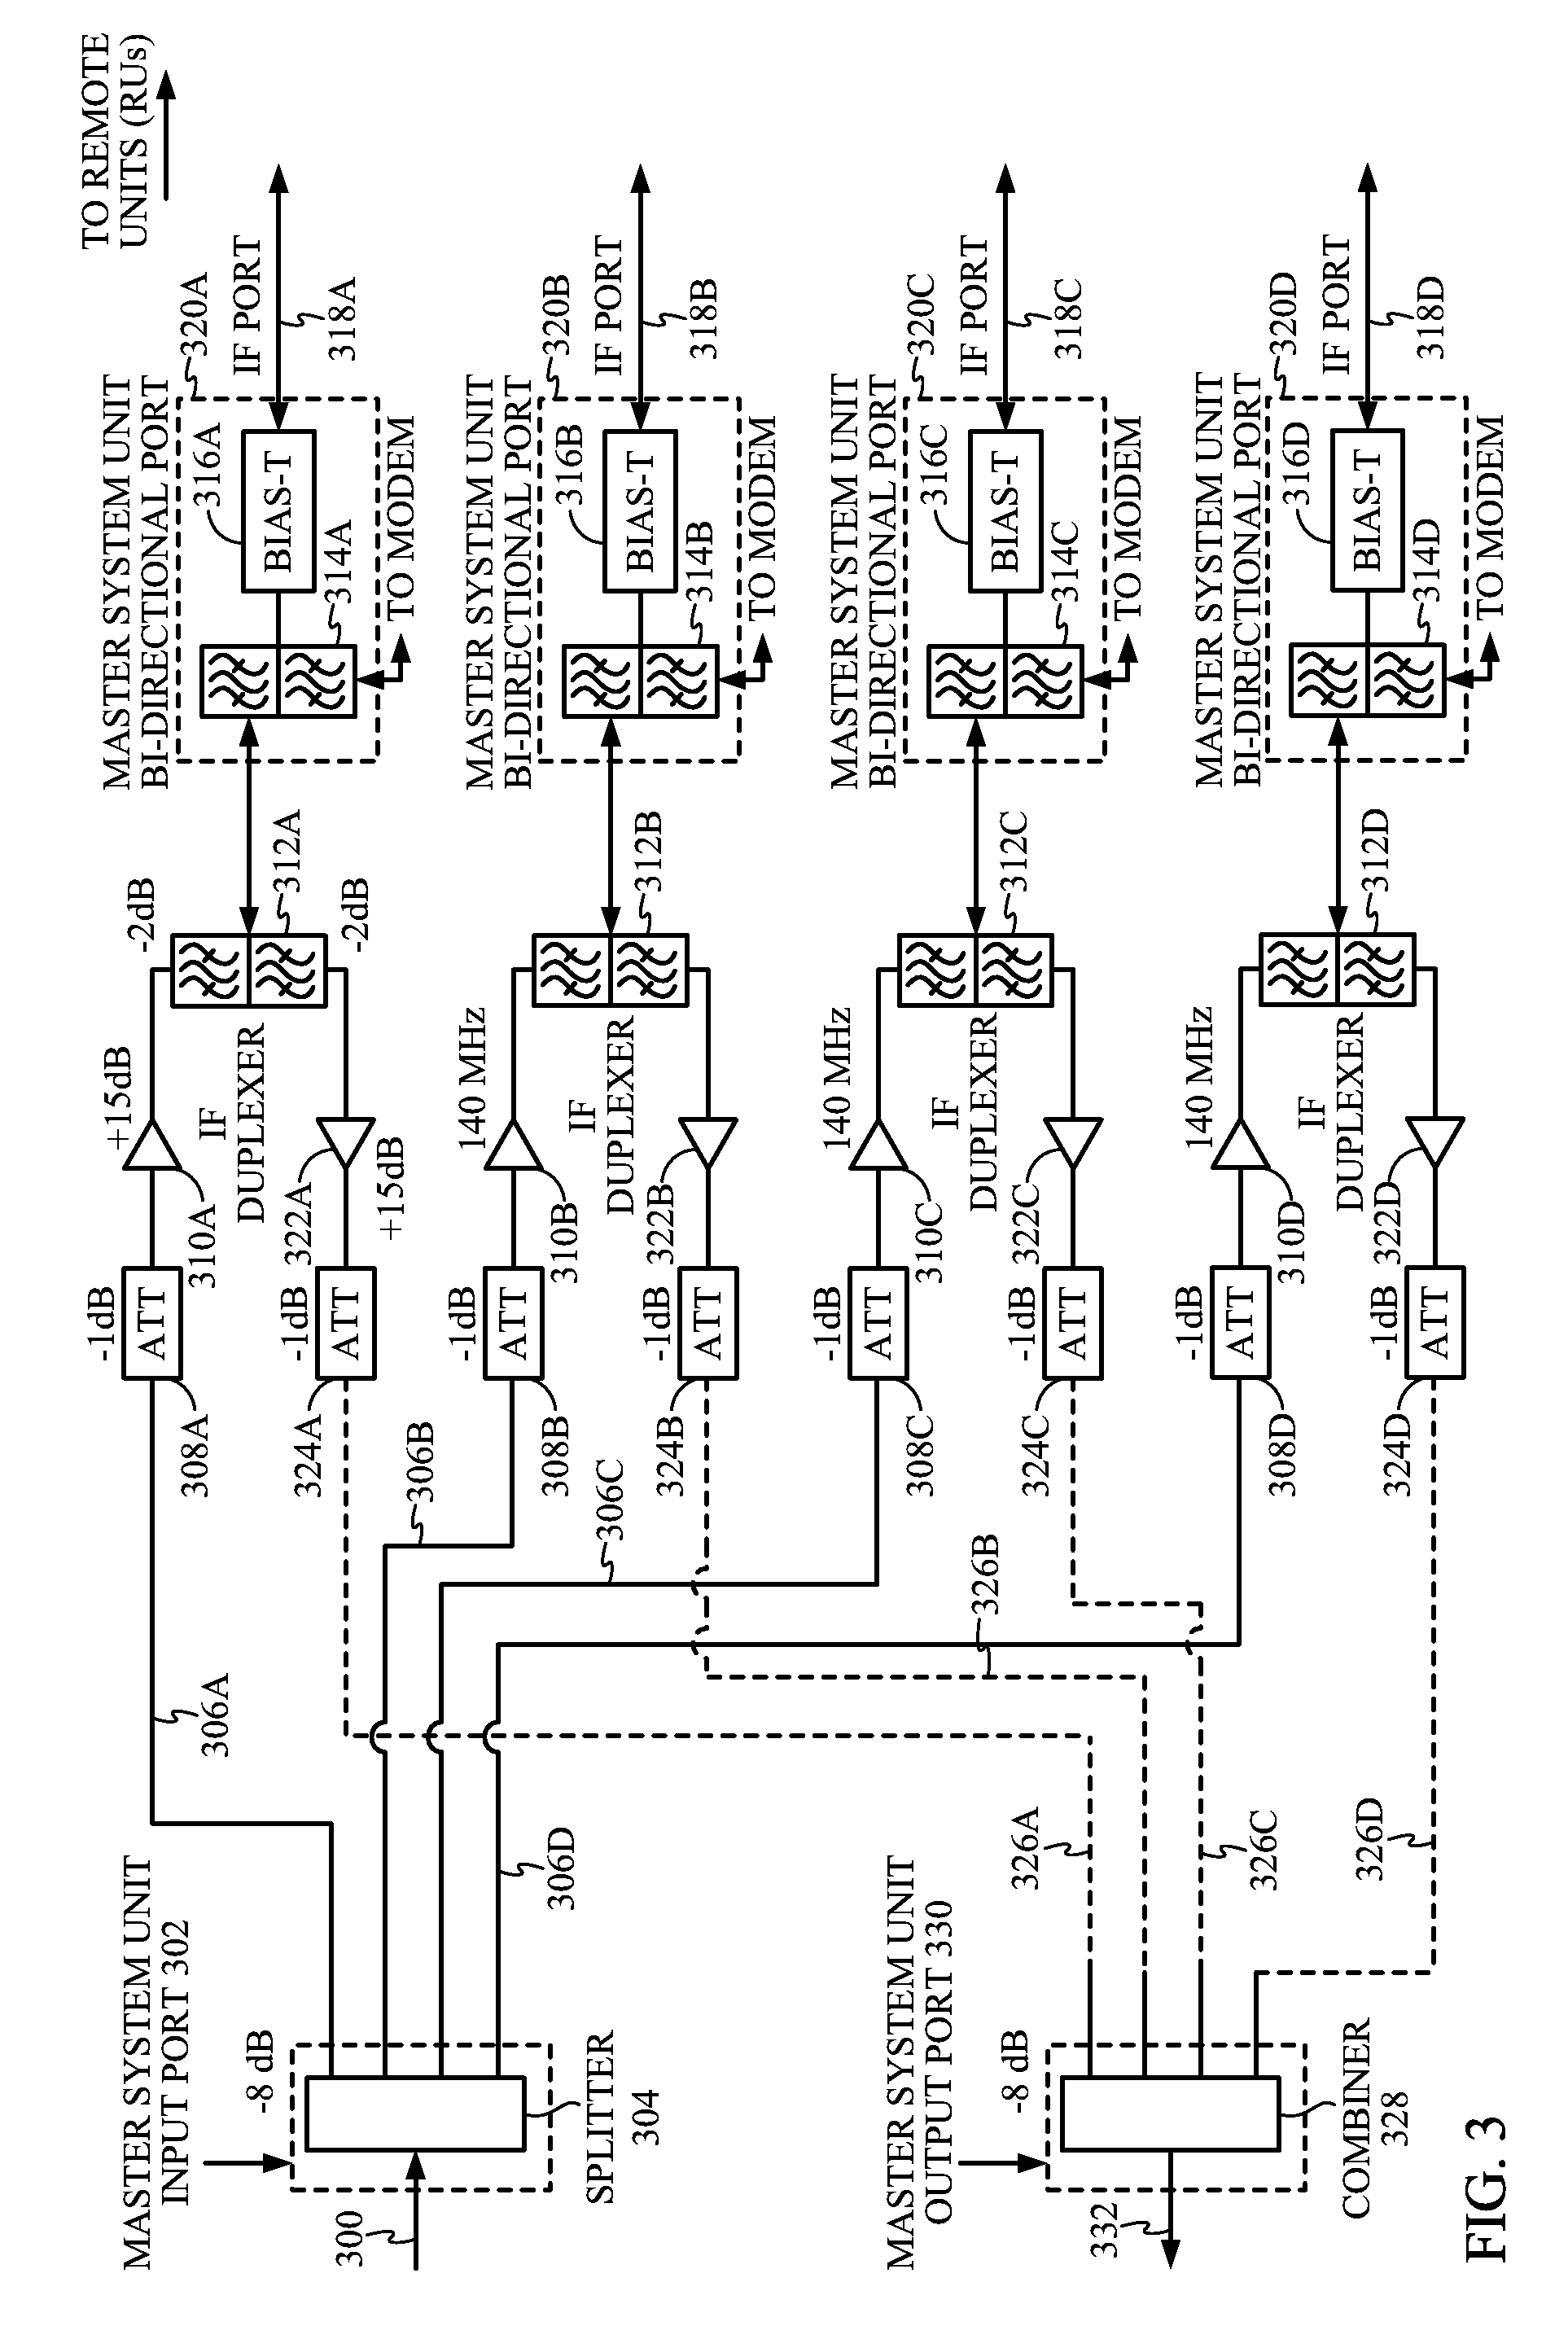 Method and an apparatus for installing a communication system using active combiner/splitters